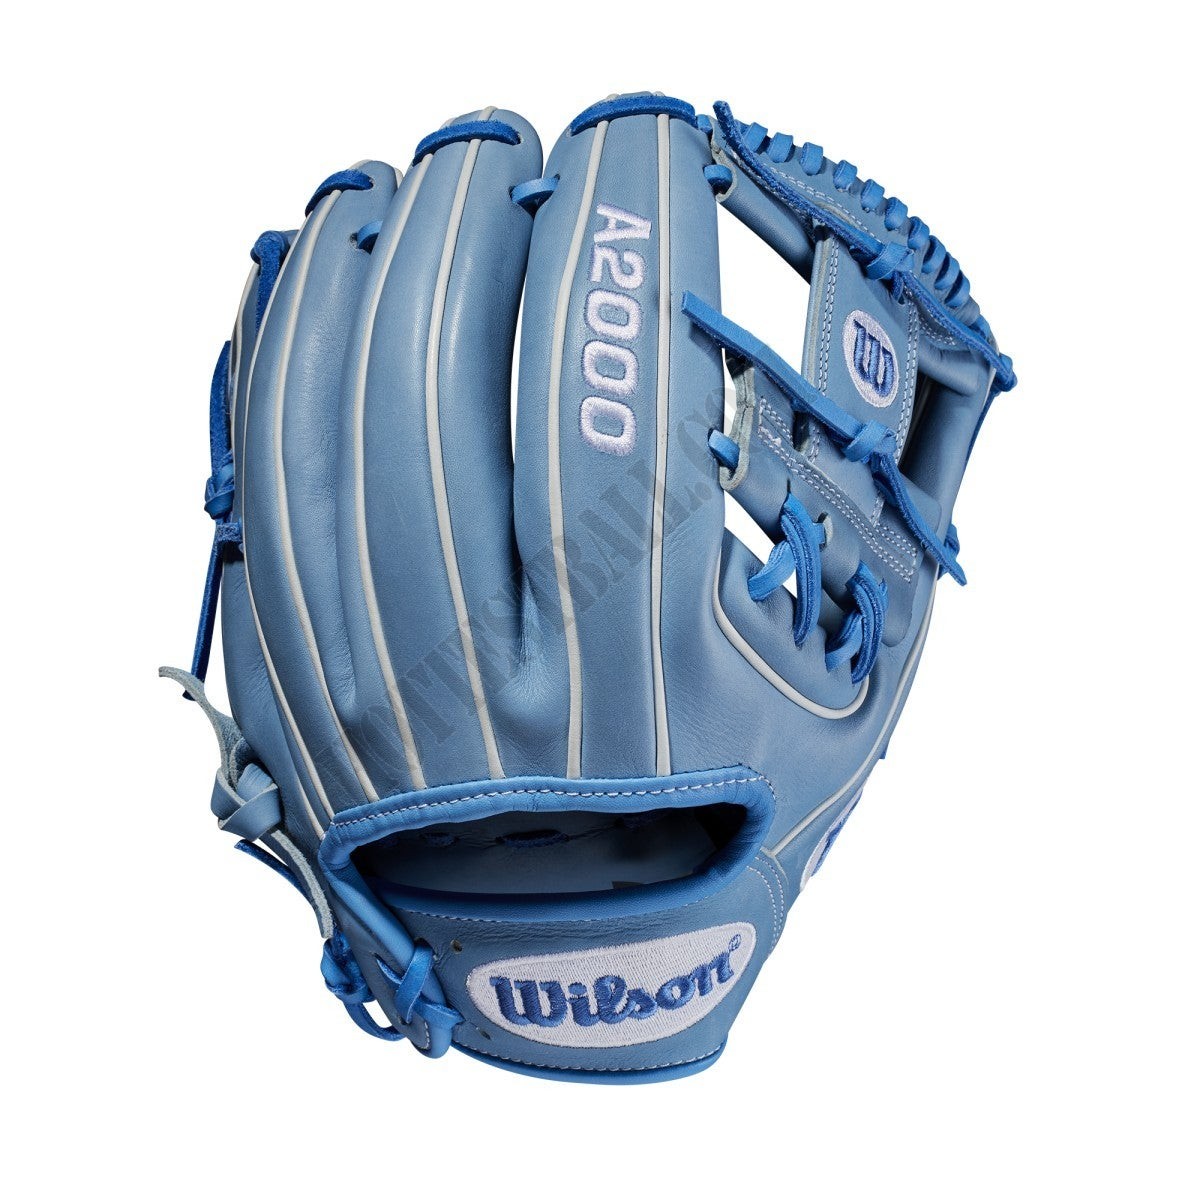 2020 Autism Speaks A2000 1786 11.5" Infield Baseball Glove - Limited Edition ● Wilson Promotions - -1